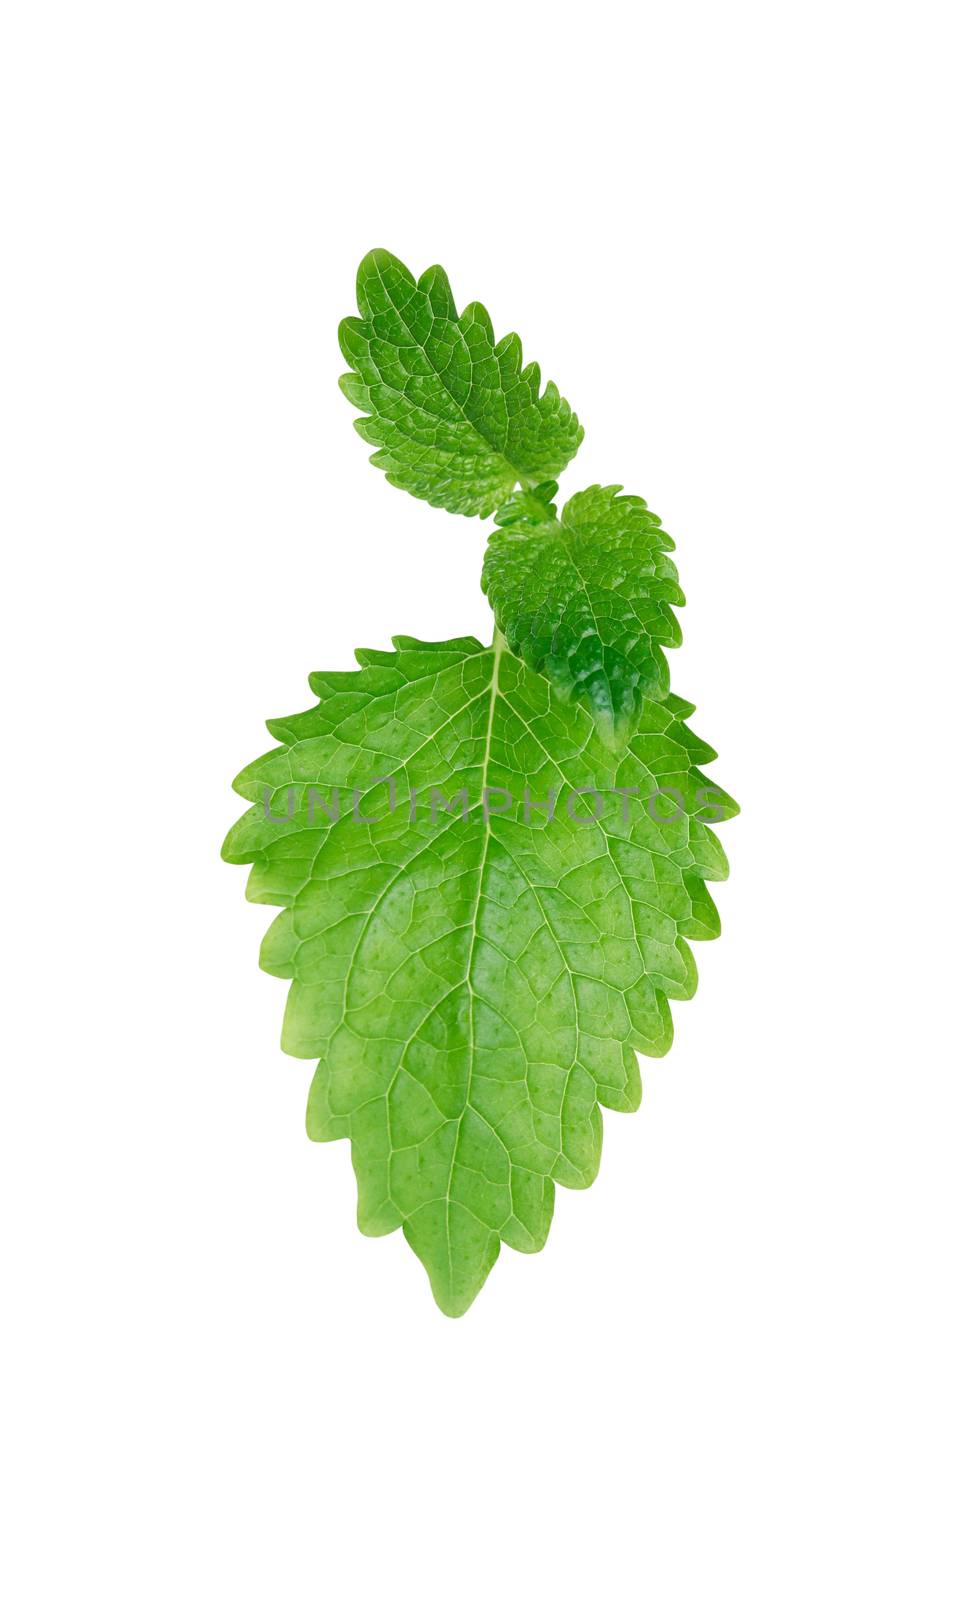 Green mint leaves isolated on white background with clipping path